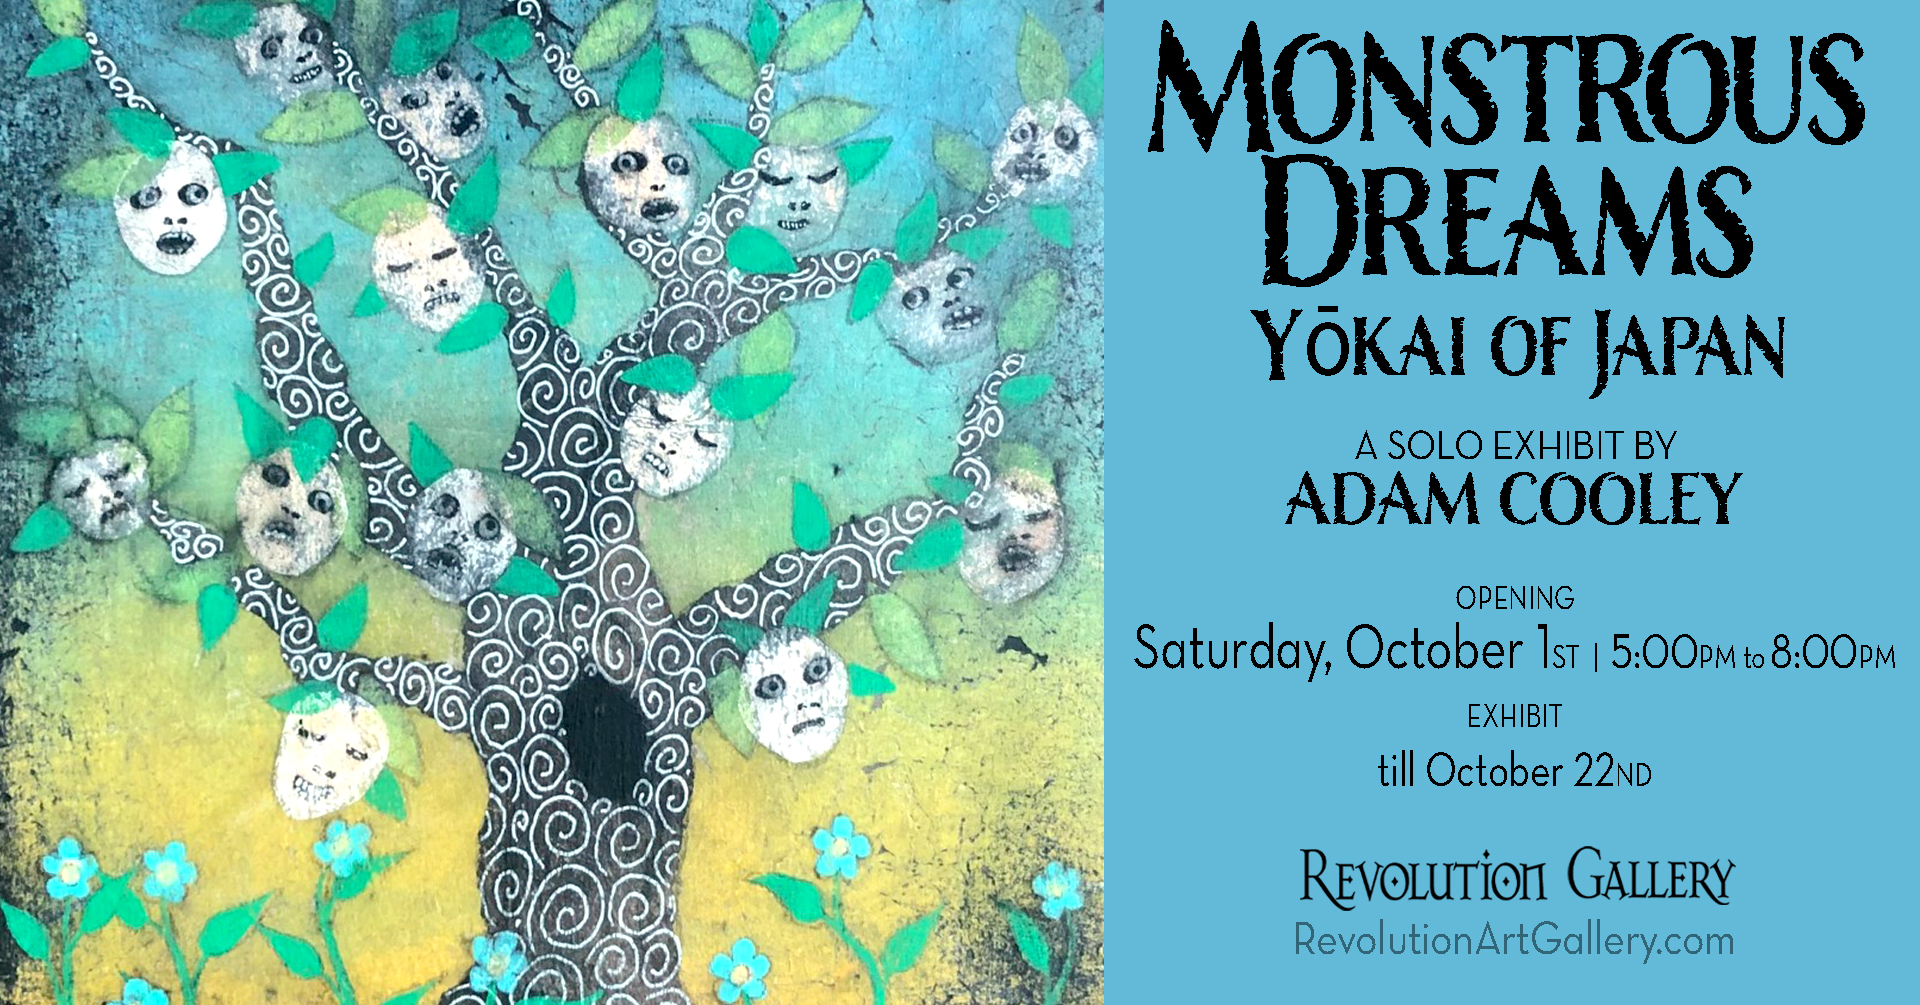 Exhibit Opening Saturday, October 1st  |  Gallery Two